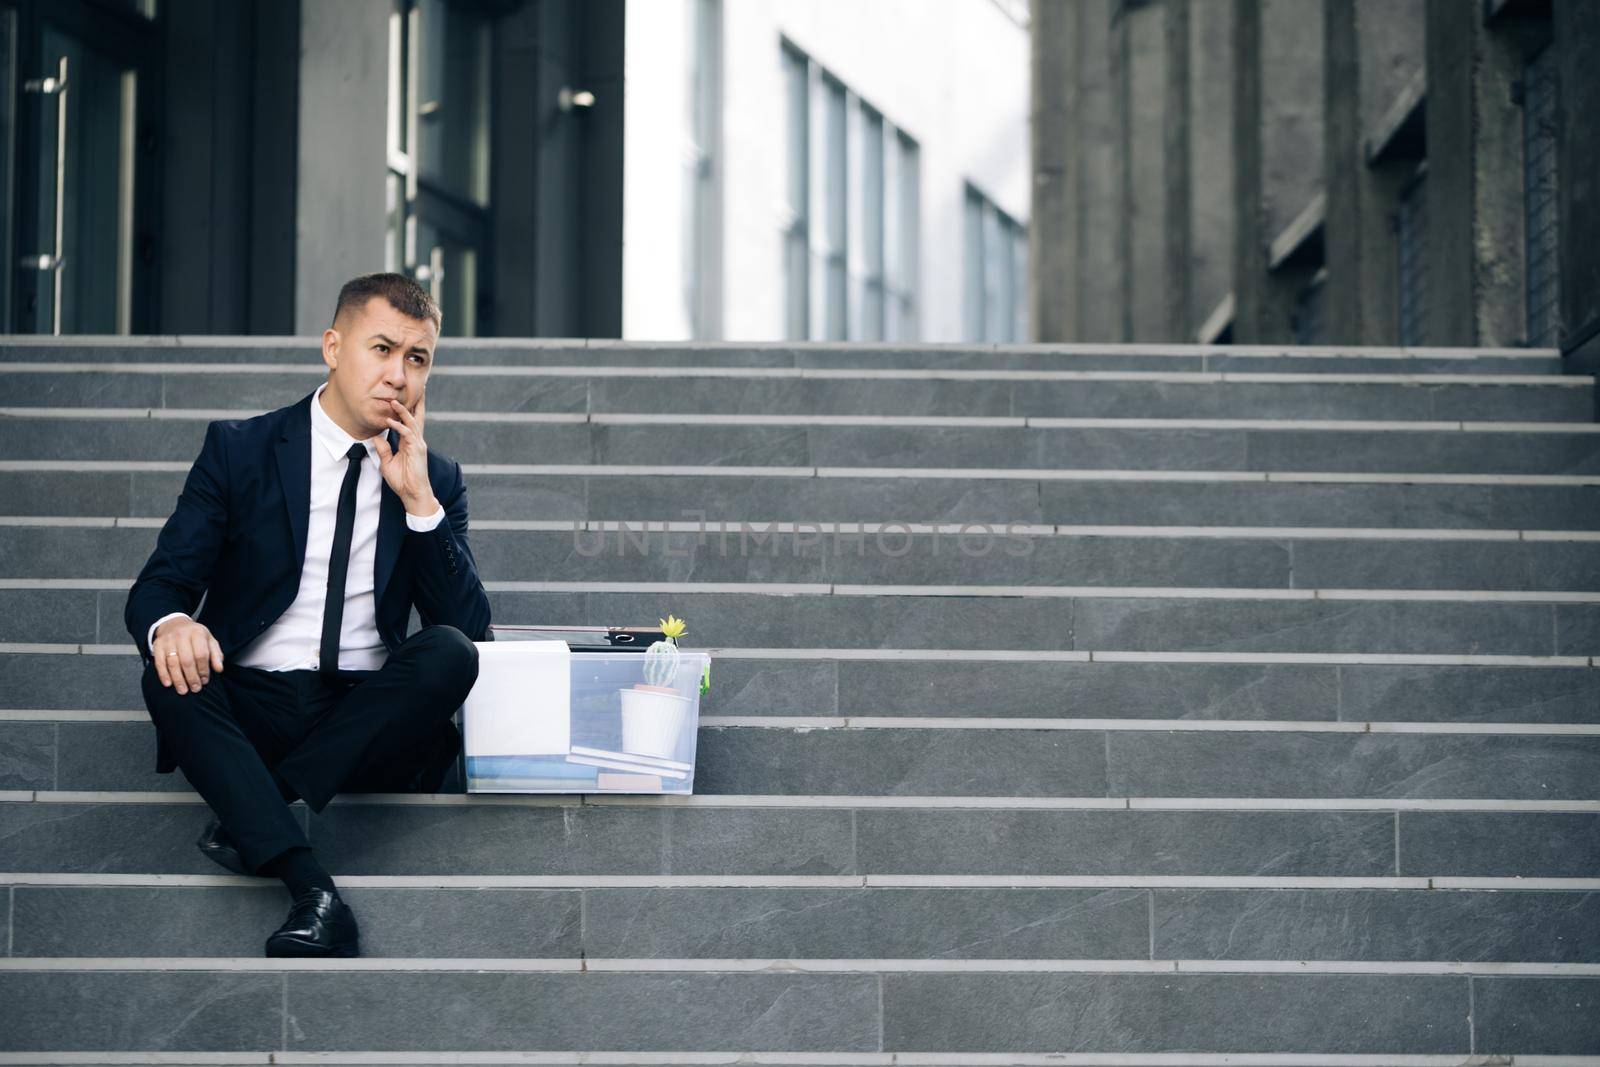 Sad businessman sitting on stairs outdoor with box of stuff as lost business. Fired man. Unemployment rate growing due pandemic. Male office worker in despair lost job.